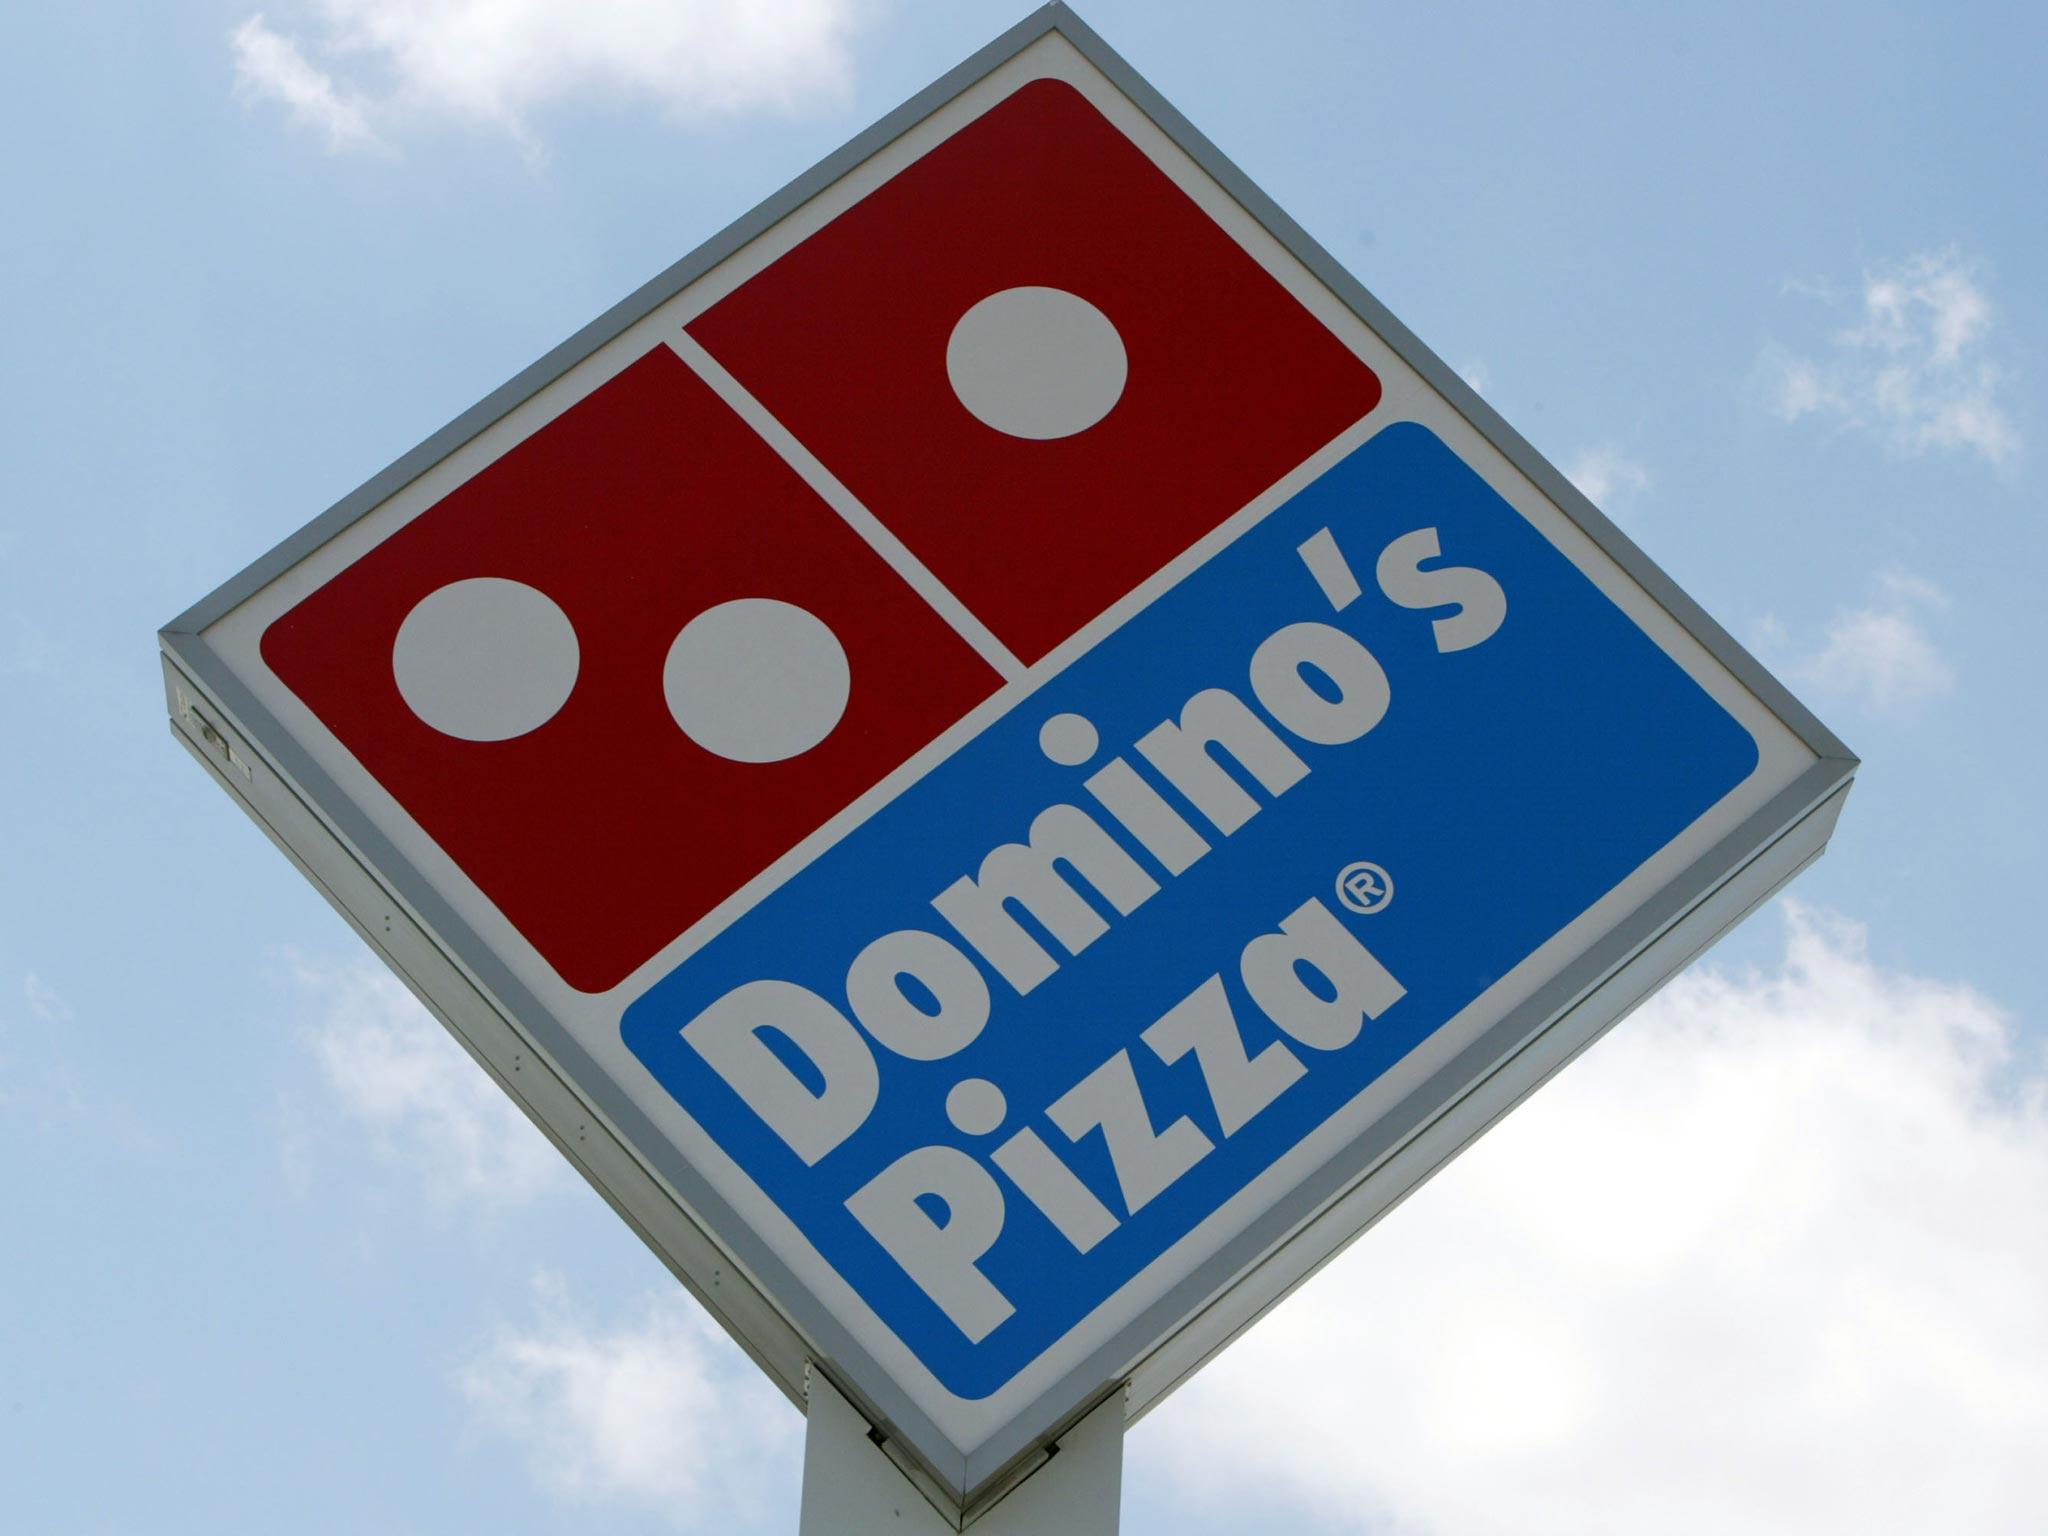 Domino's Old Logo - Domino's Pizza sales up 19% thanks to mobile app